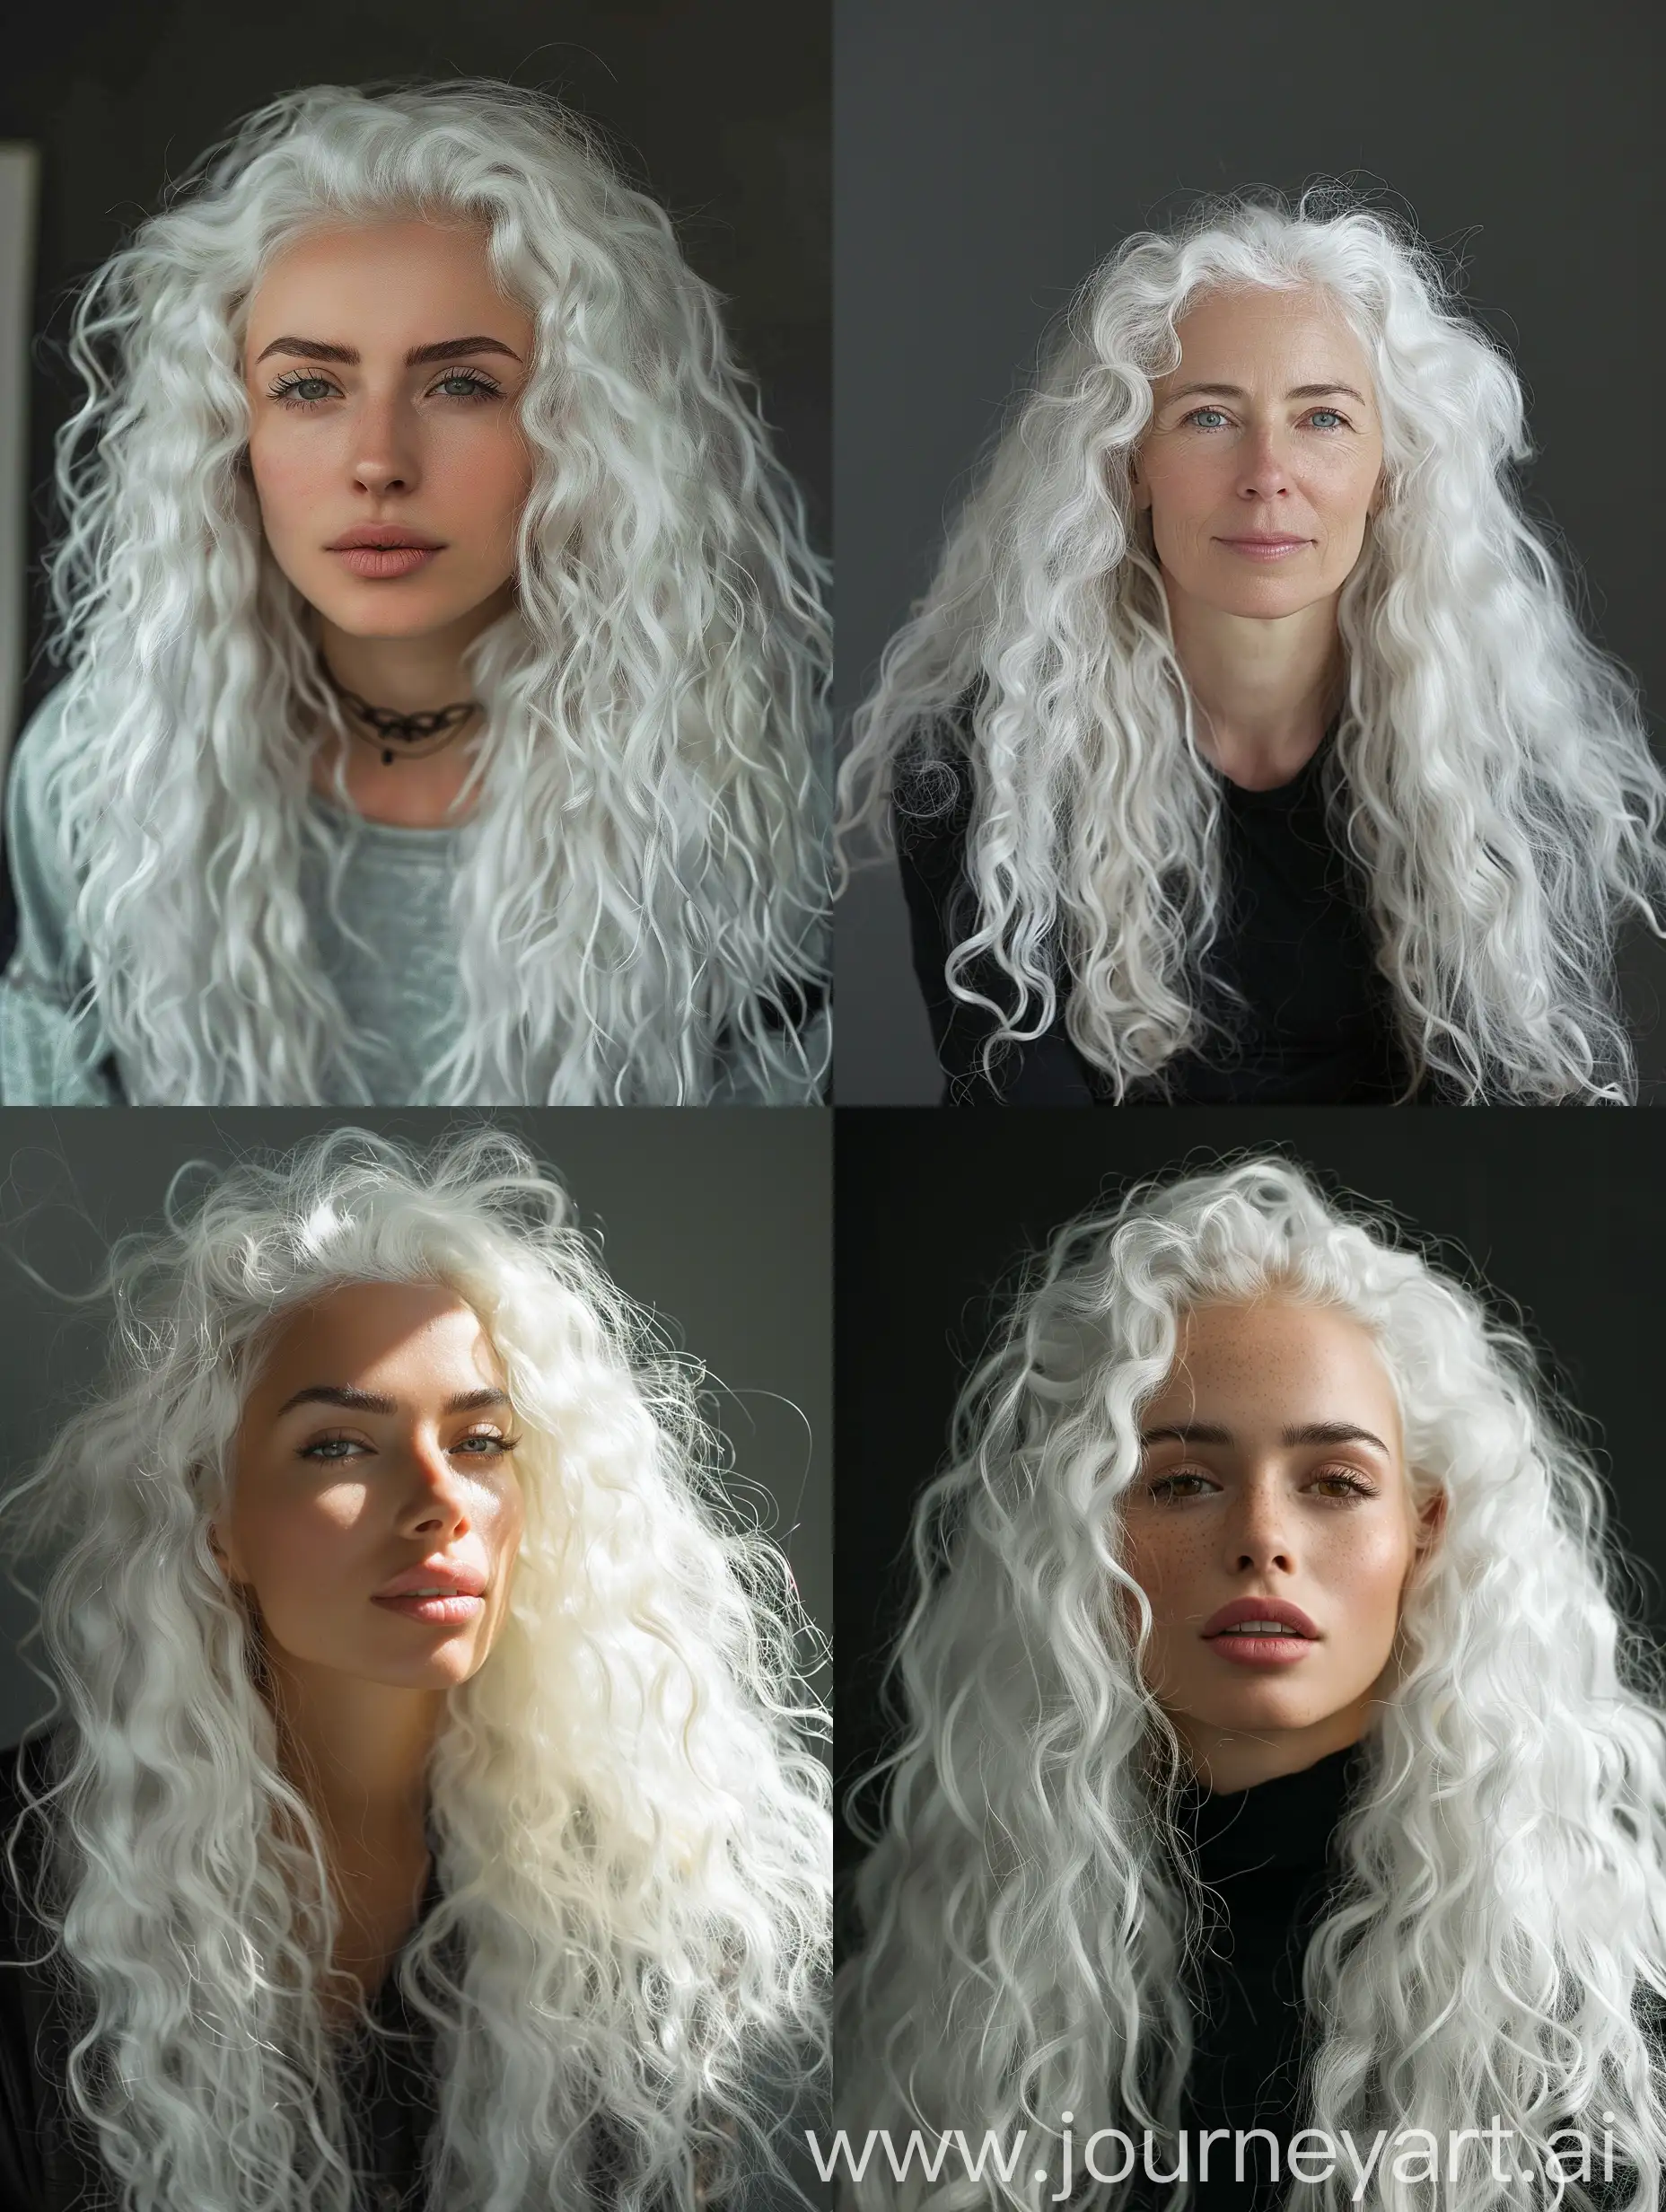  woman with long white curly hair, lighting from the front 3/4, photo